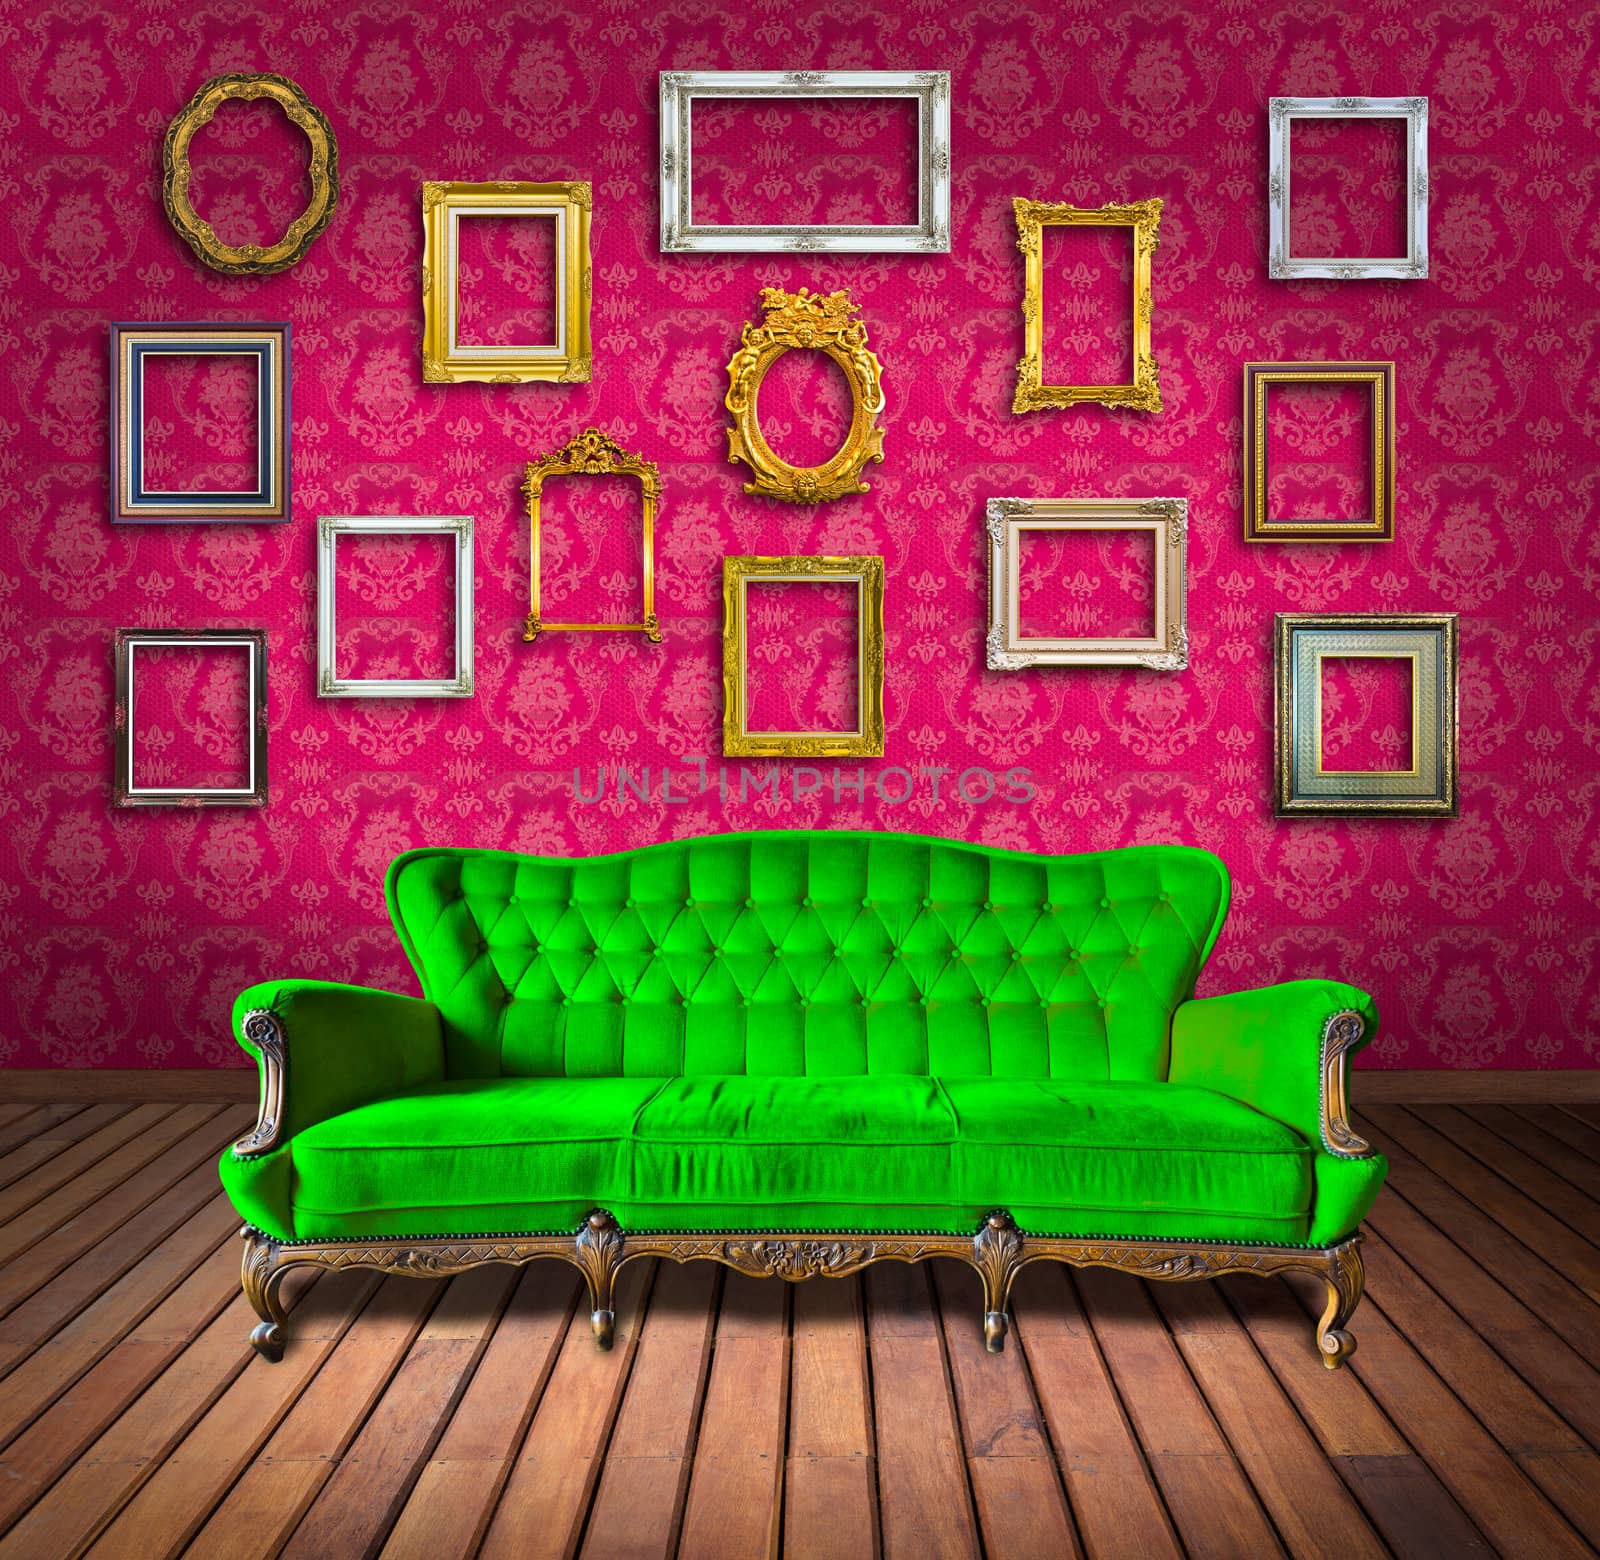 vintage luxury armchair and frame in pink wallpaper room